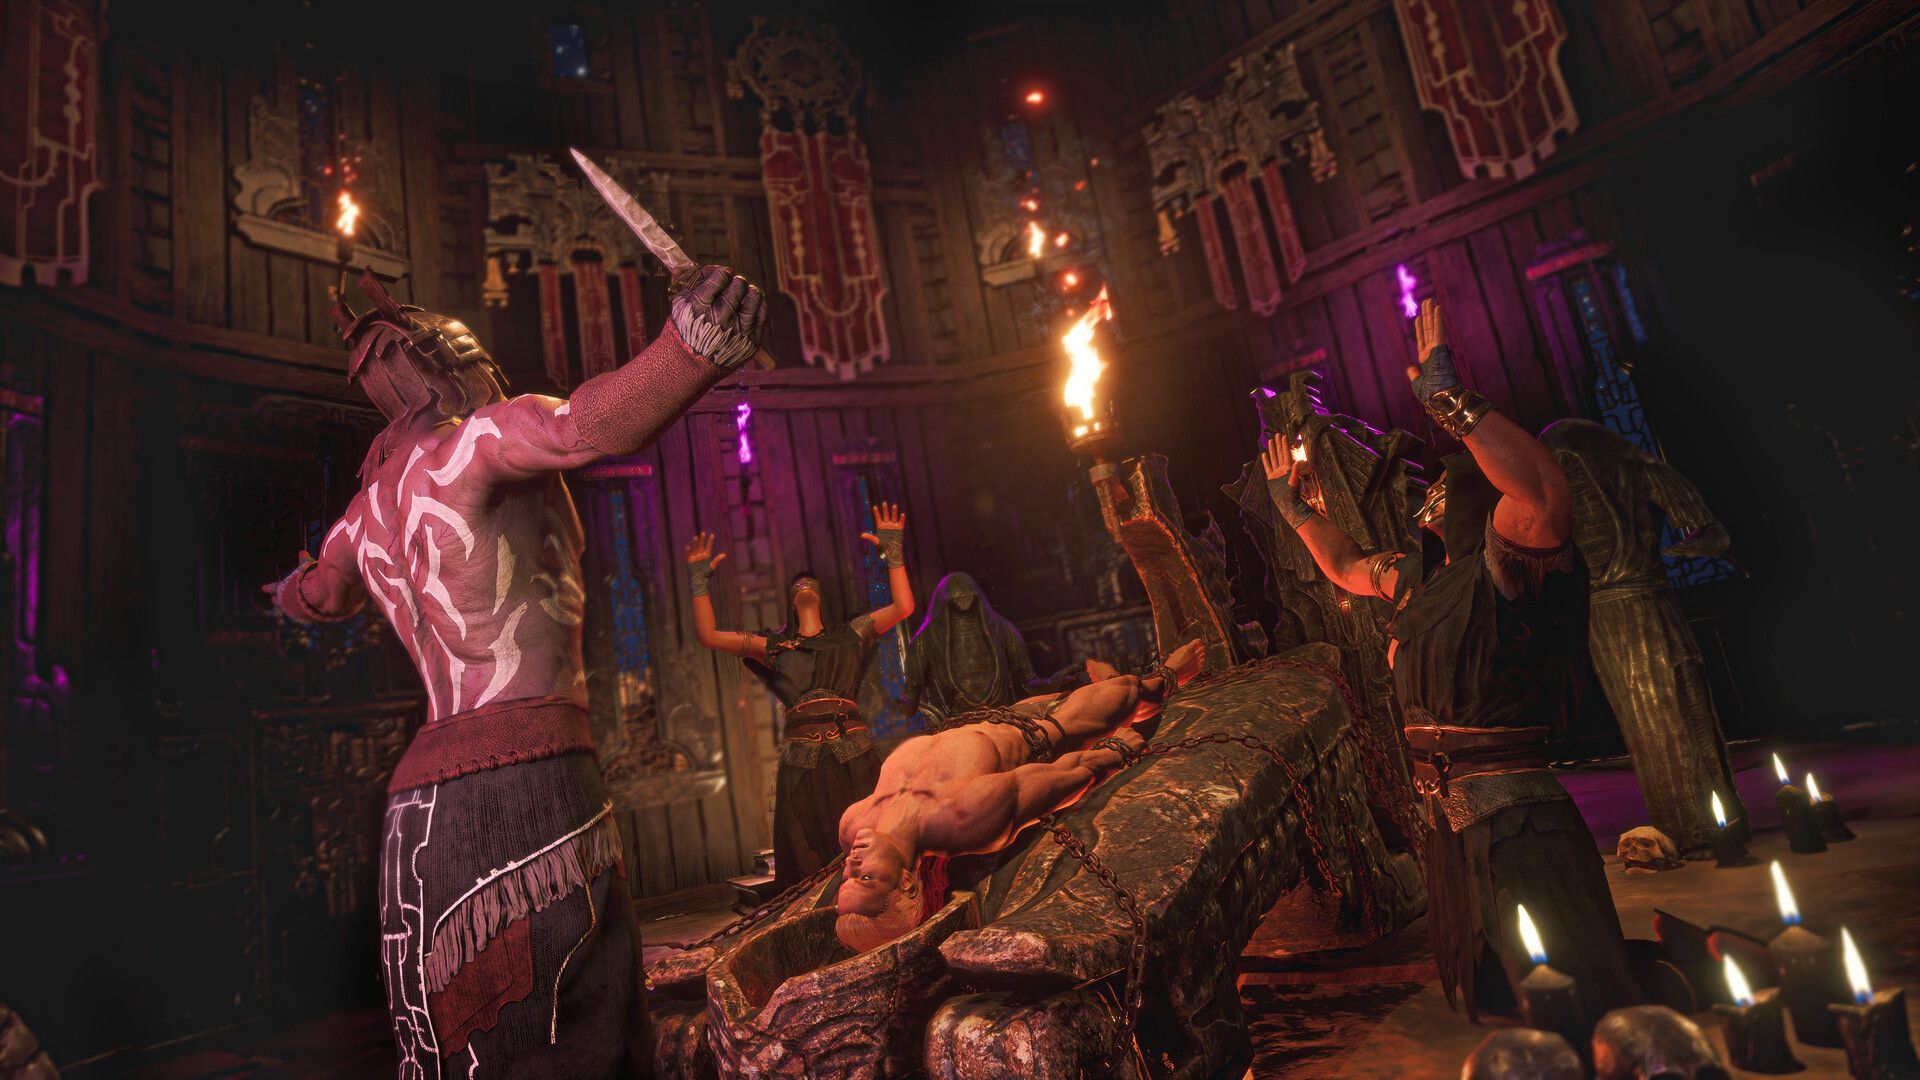 Here, we will go over how to get Conan Exiles Hardened Leather easily as possible, so you can use it to craft better armor in order to protect yourself.